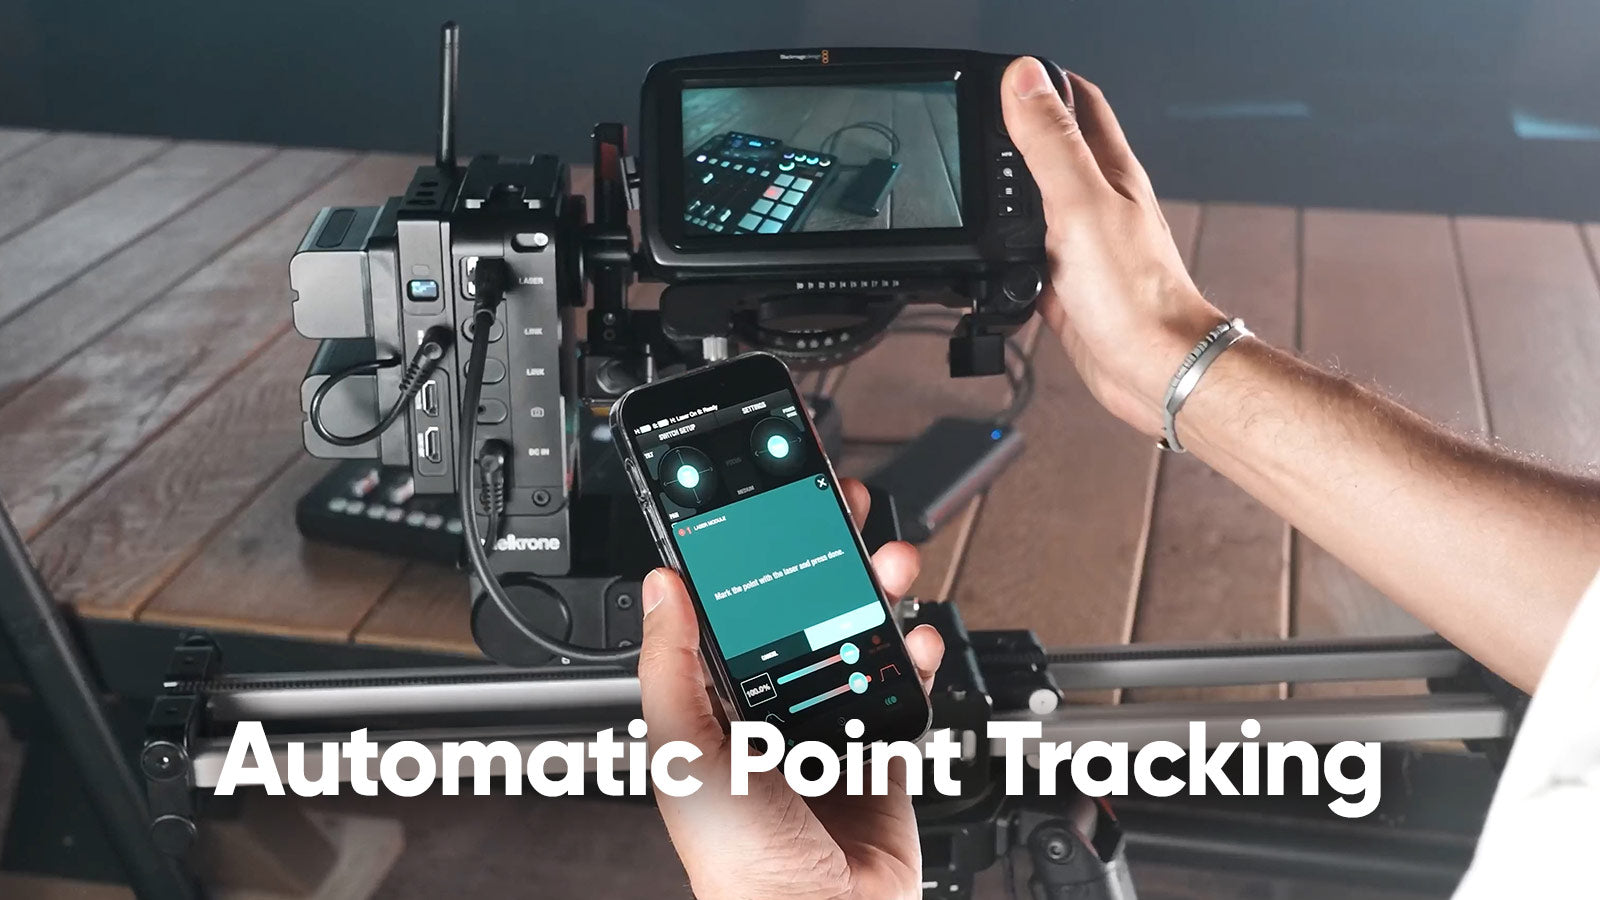 The New Point Tracking Mode Explained